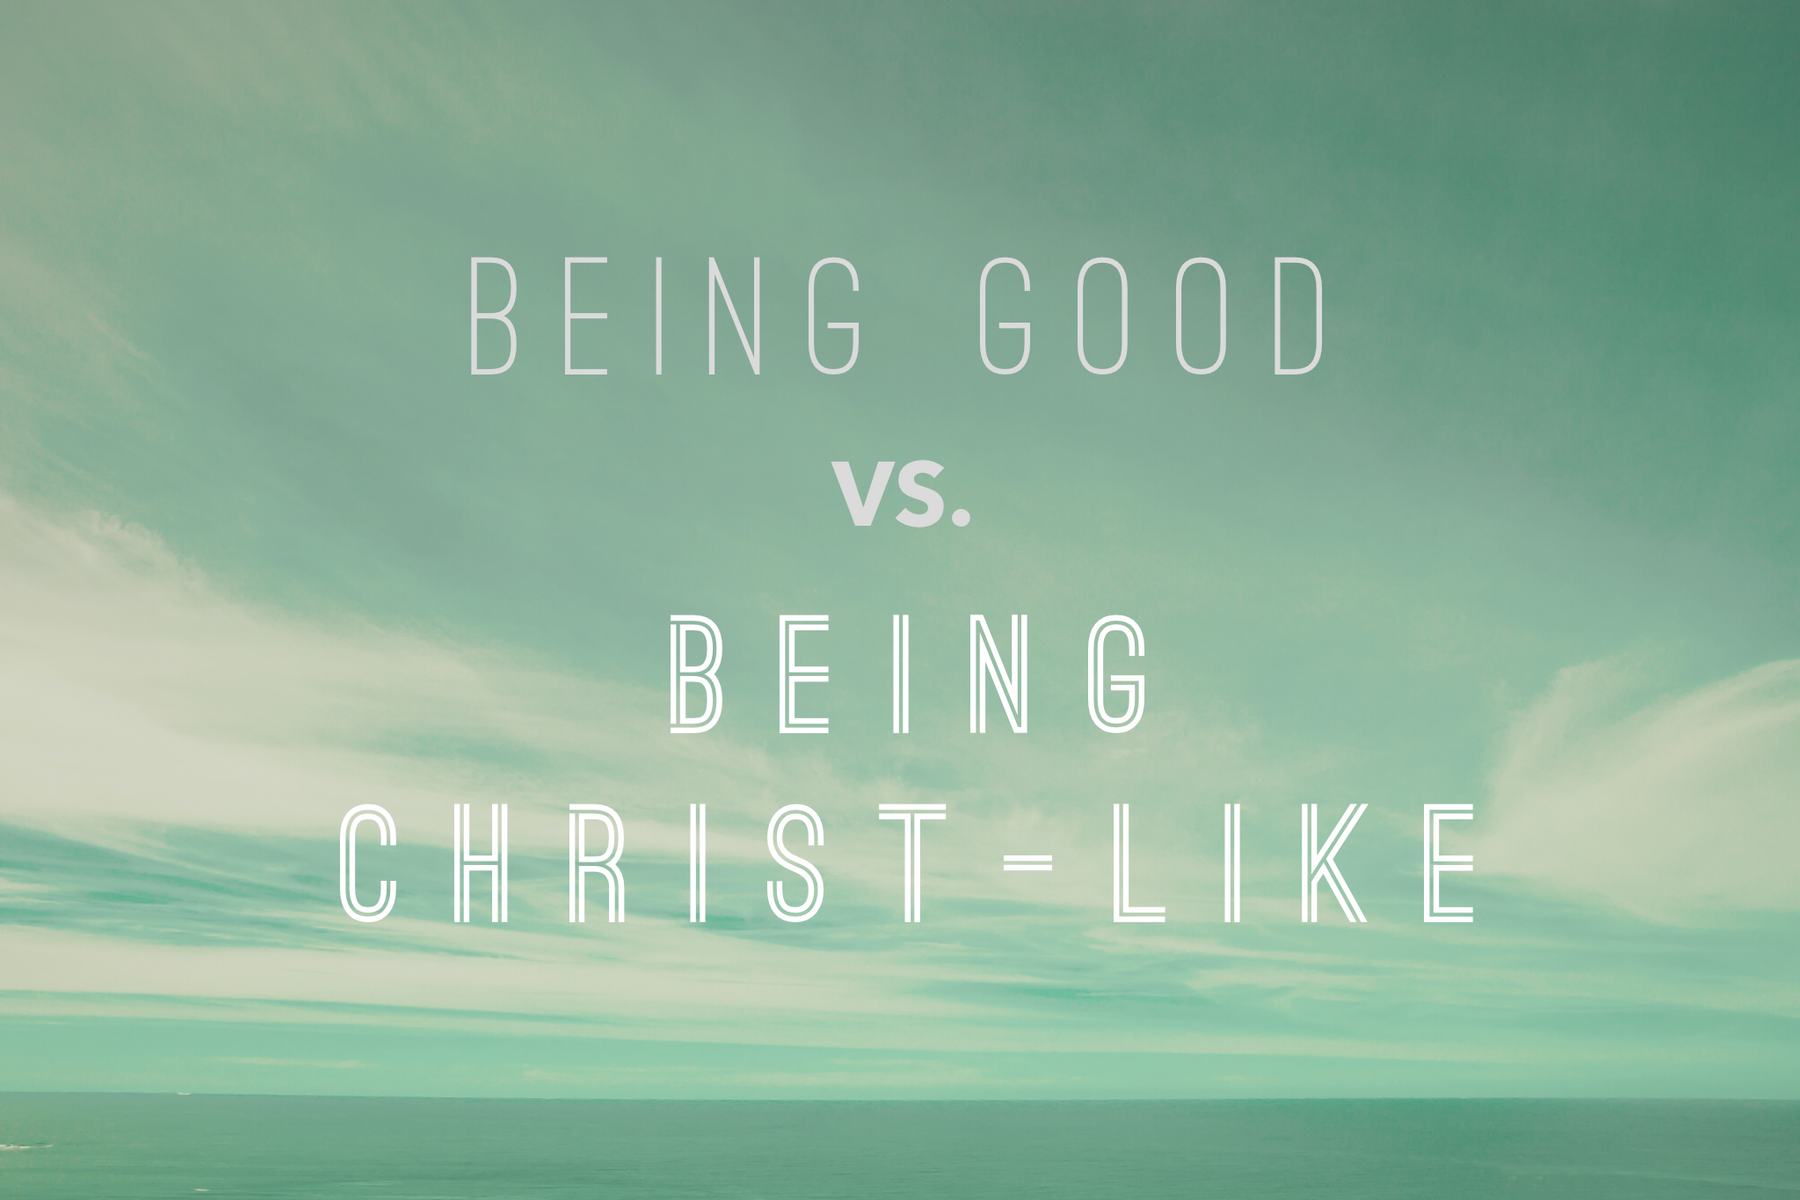 Helping Students See The Difference In Being "Good" and Being Christ-like